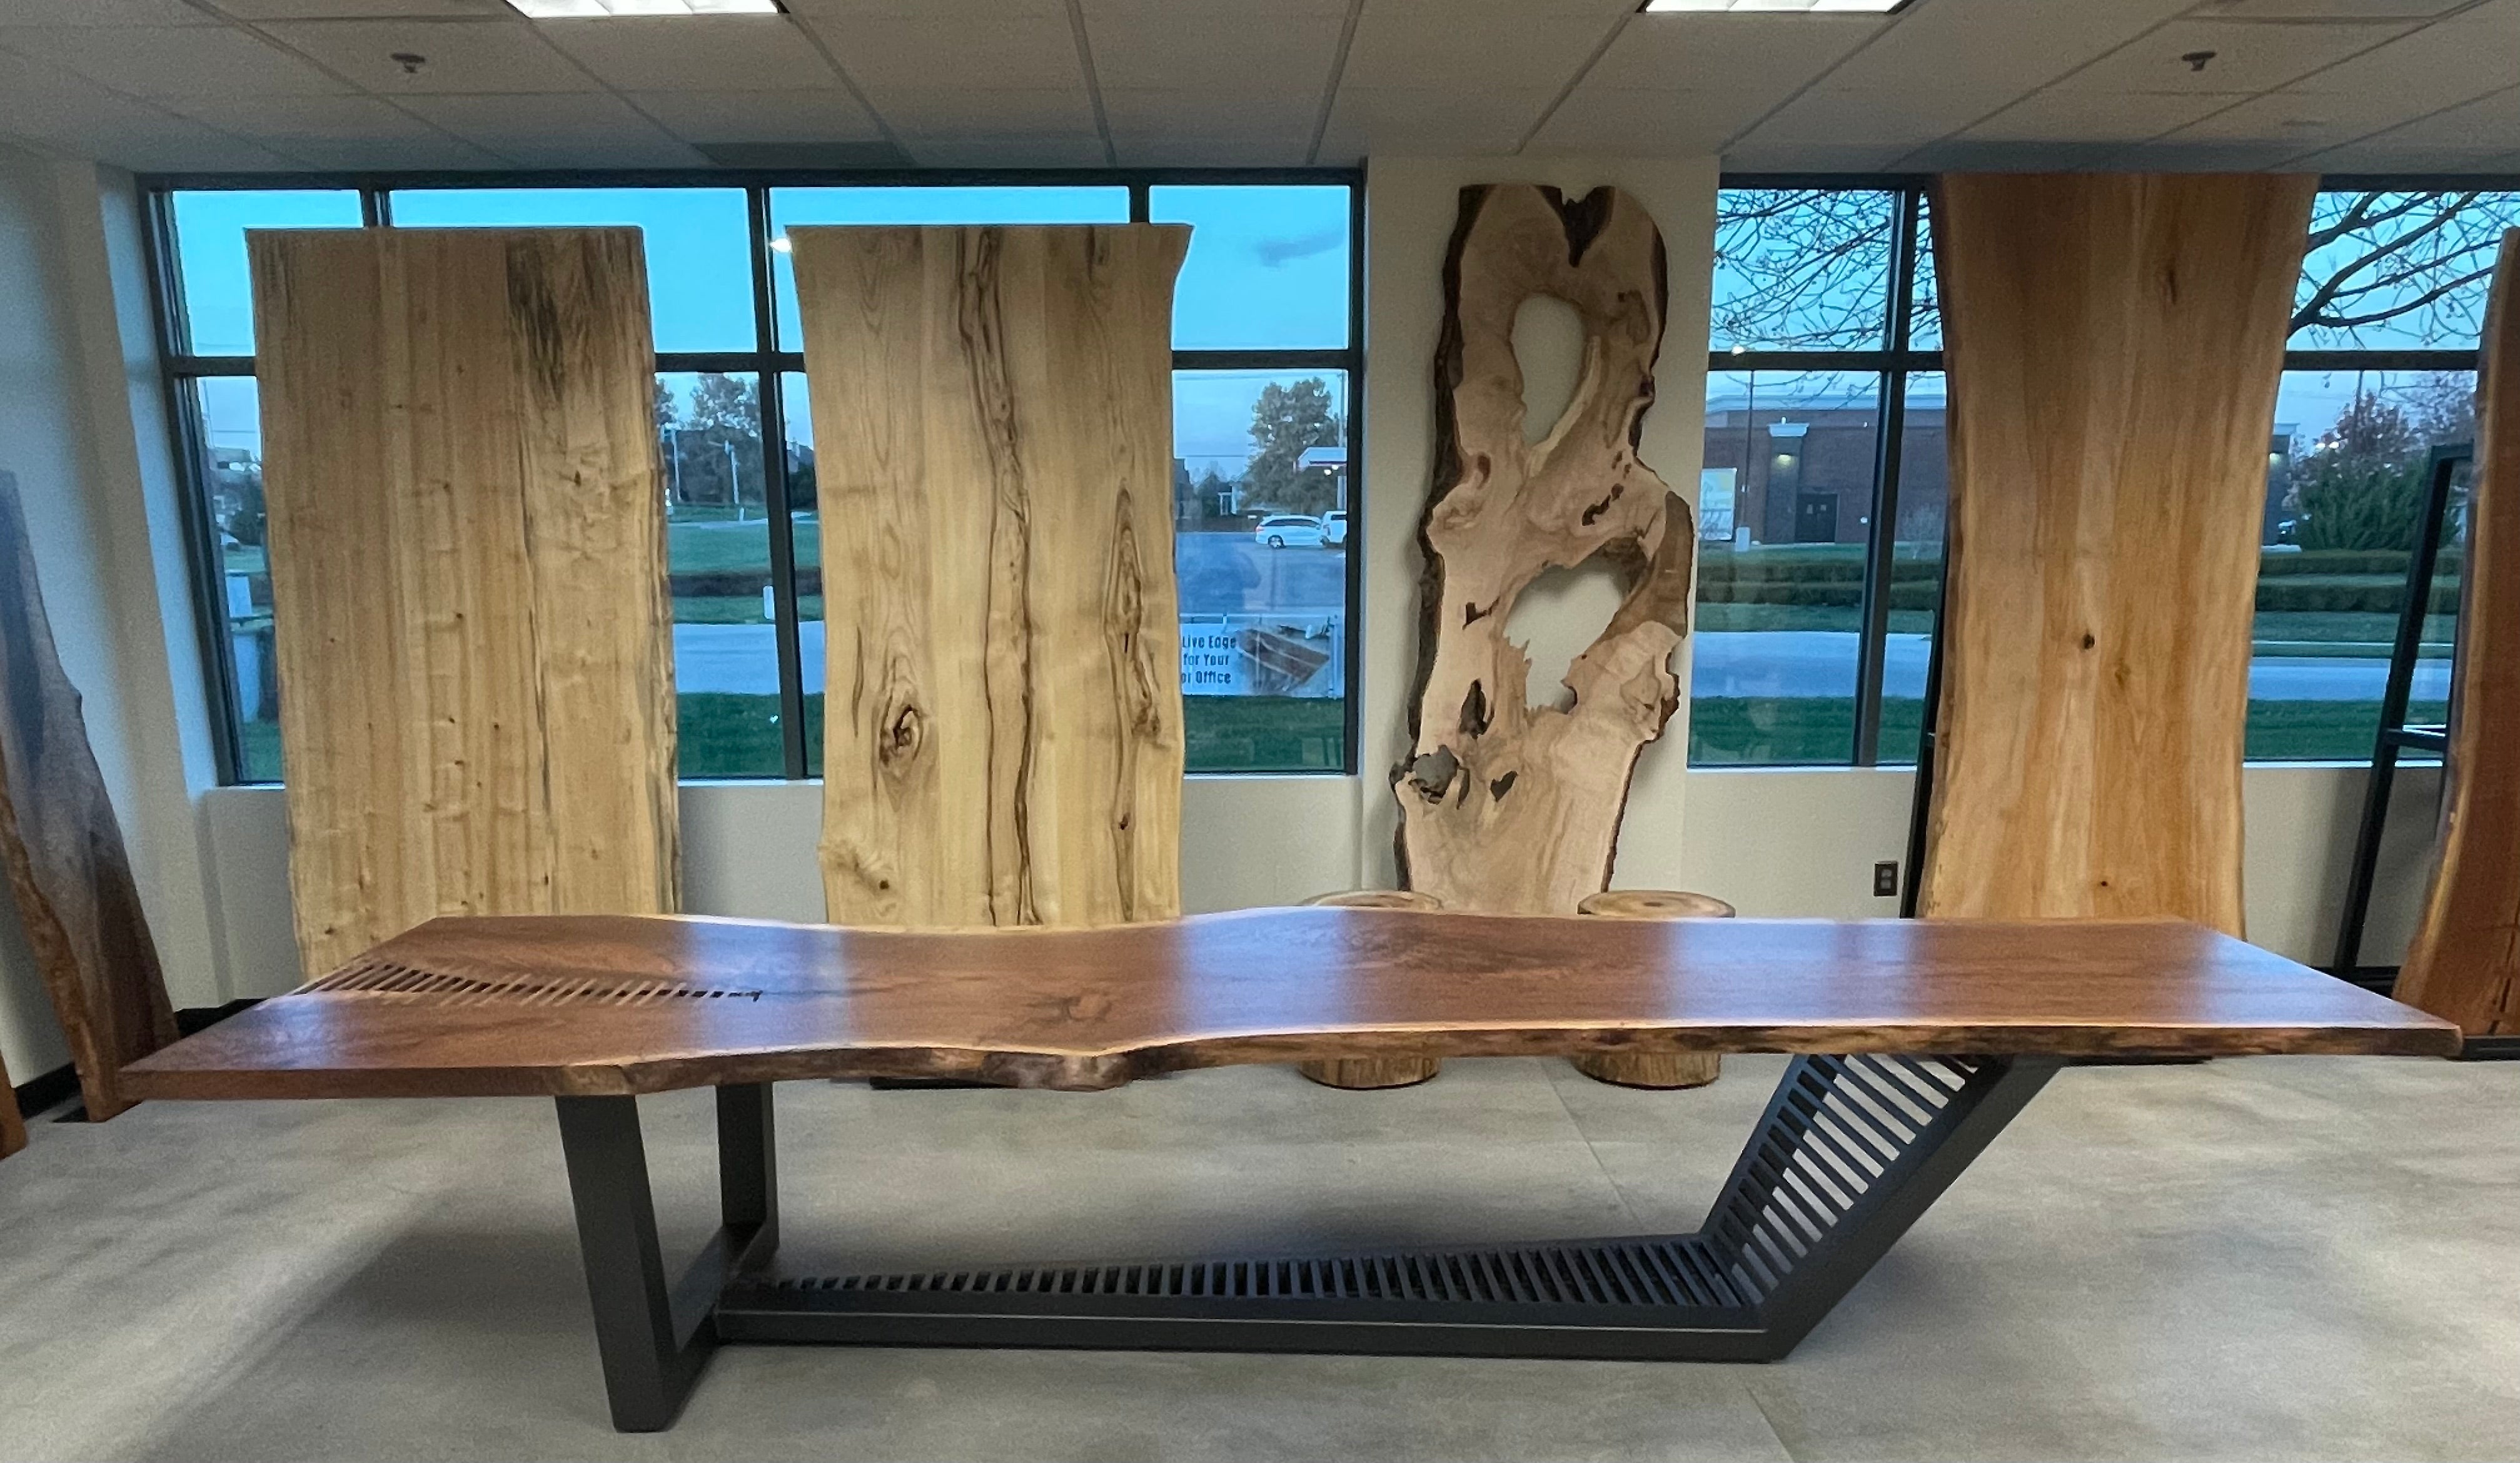 Live-edge wood furniture adds an organic touch to interior design. - design  KC